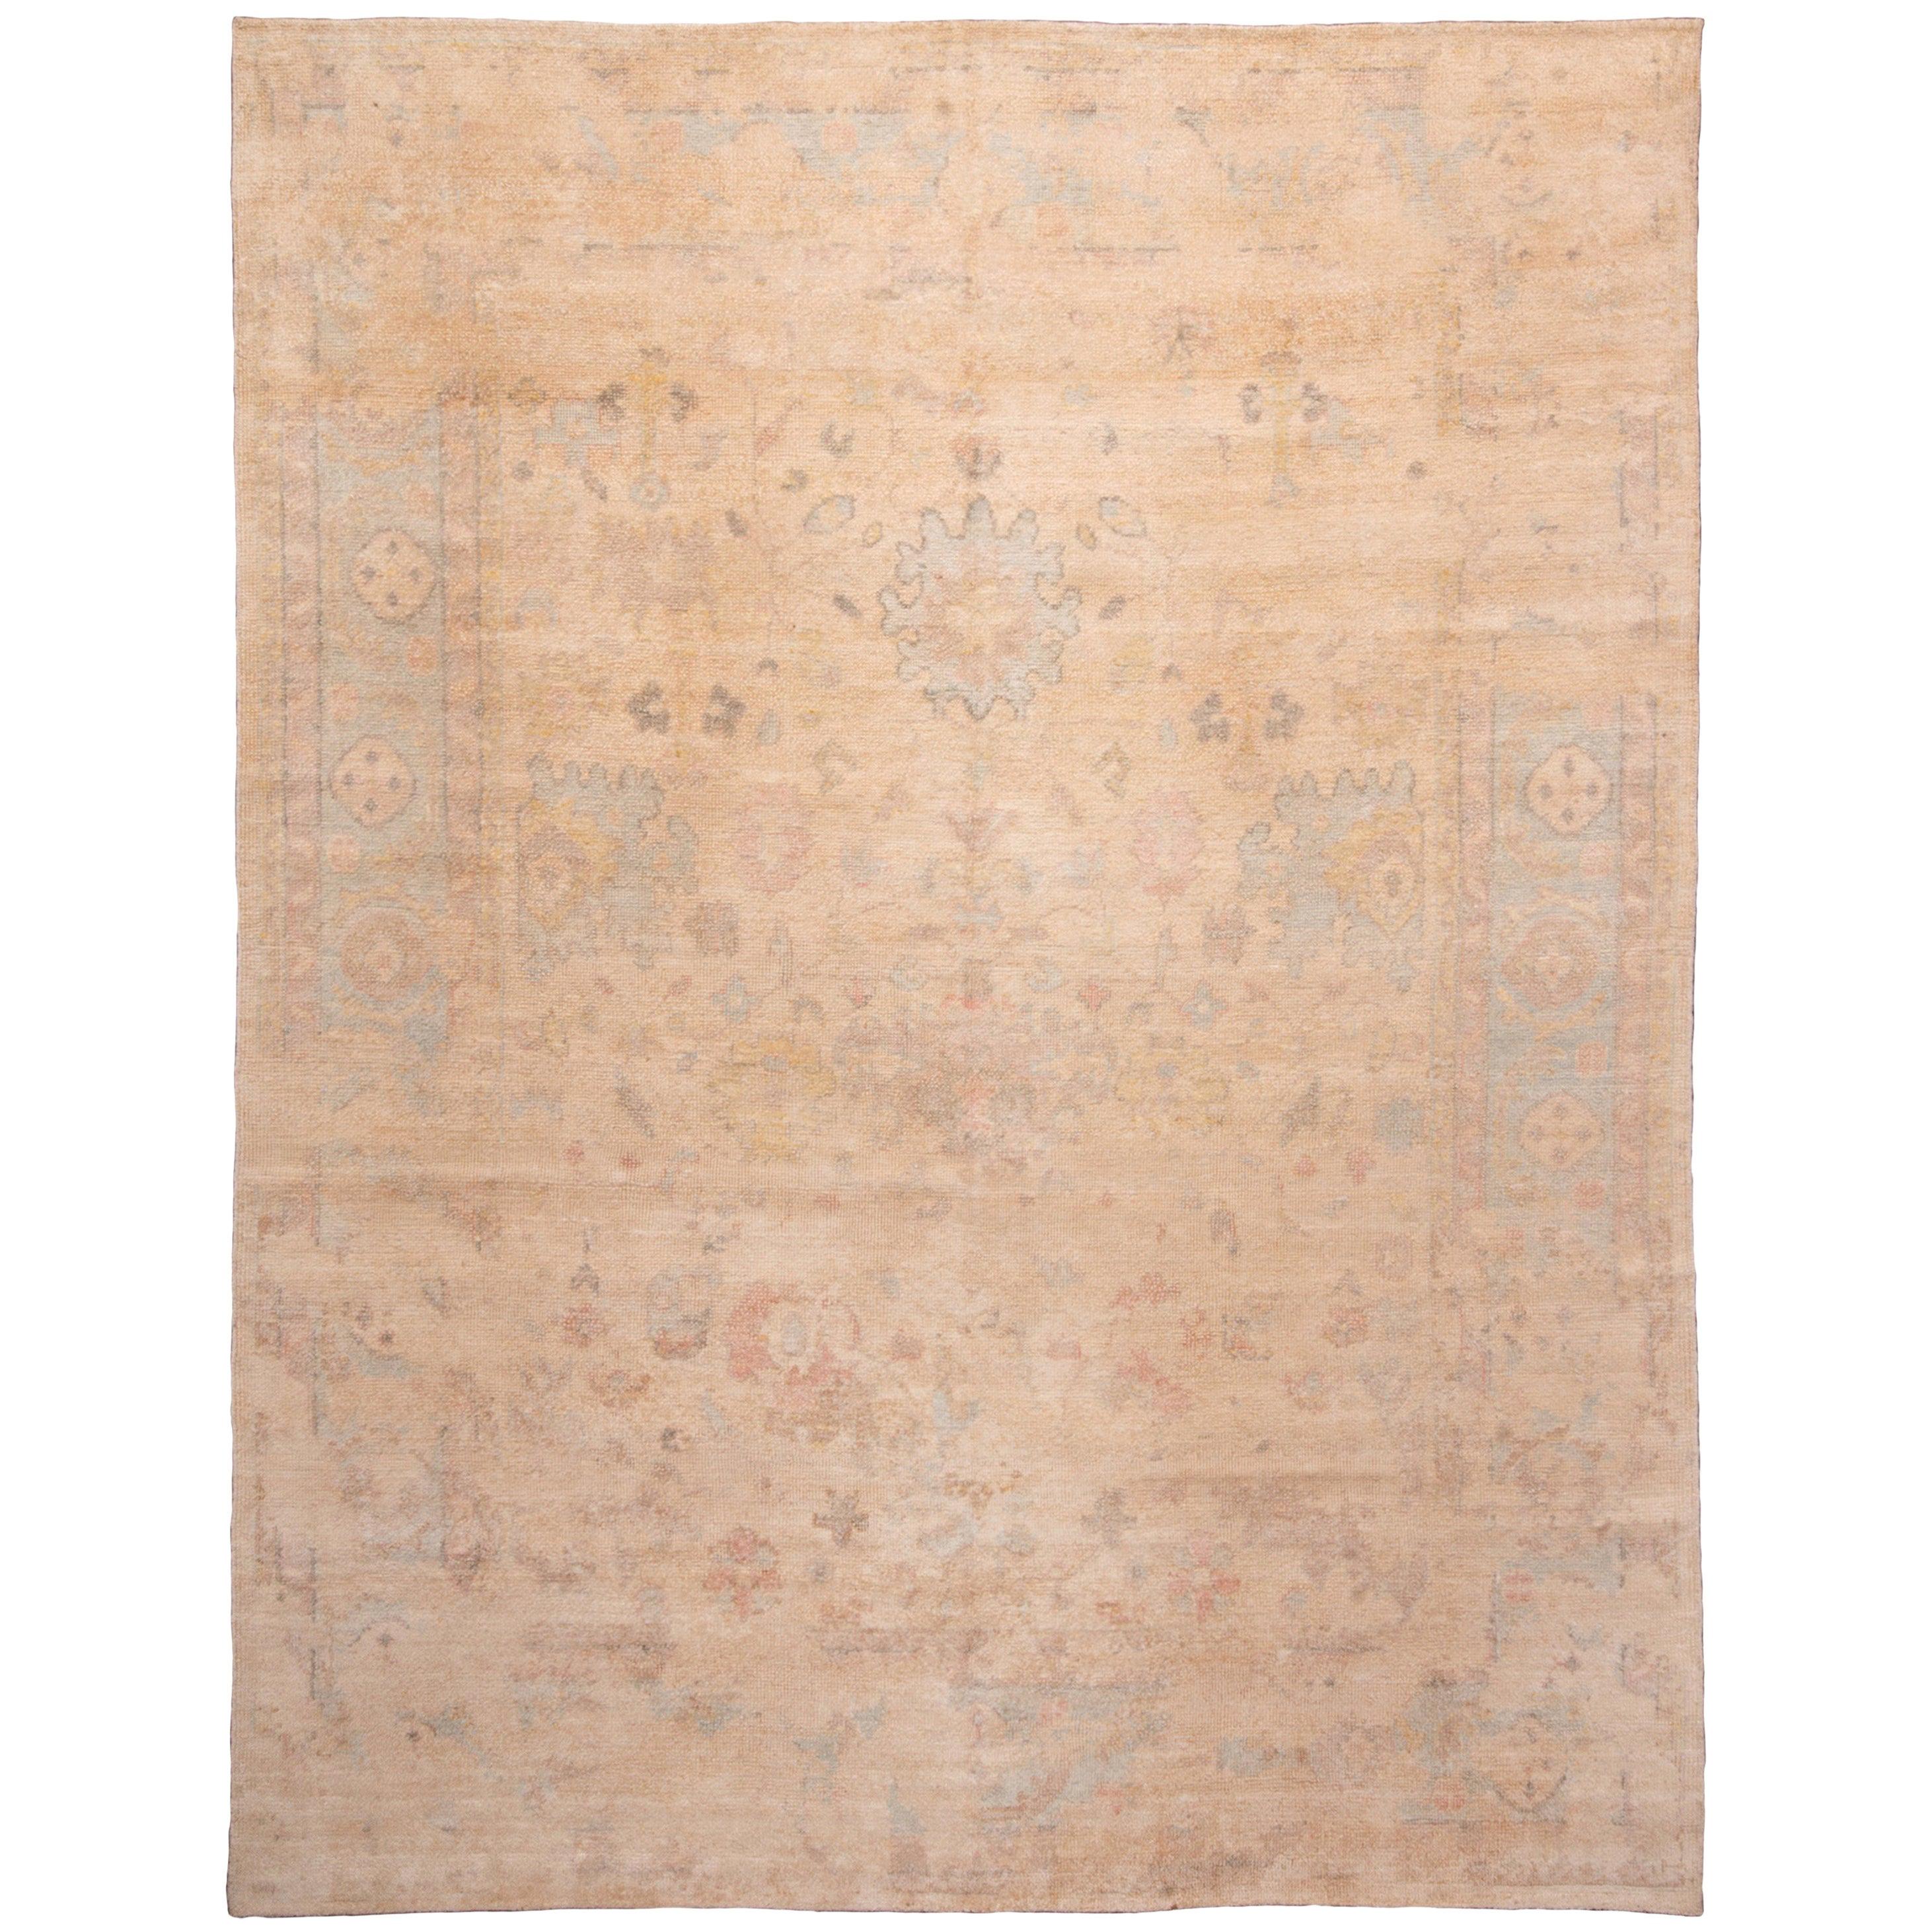 Rug & Kilim's New Traditional Oushak Pastel Wool and Silk Rug with Floral Accent